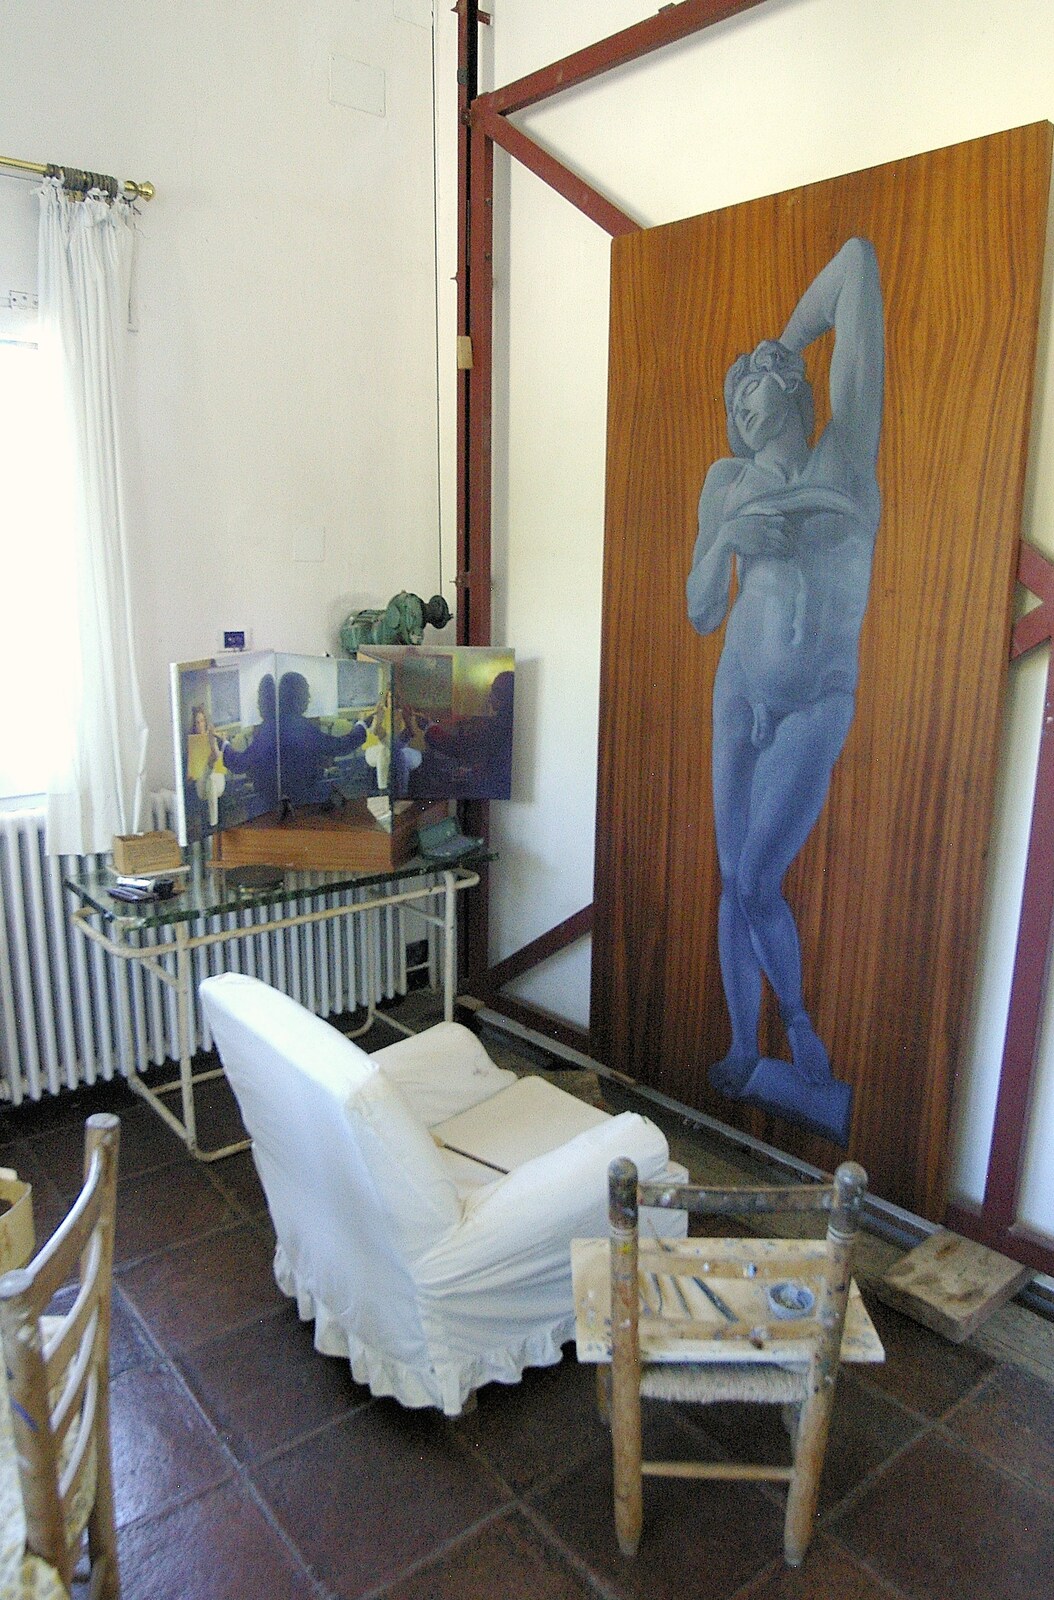 Another painting from Salvador Dalí's House, Port Lligat, Spain - 19th Deptember 2006